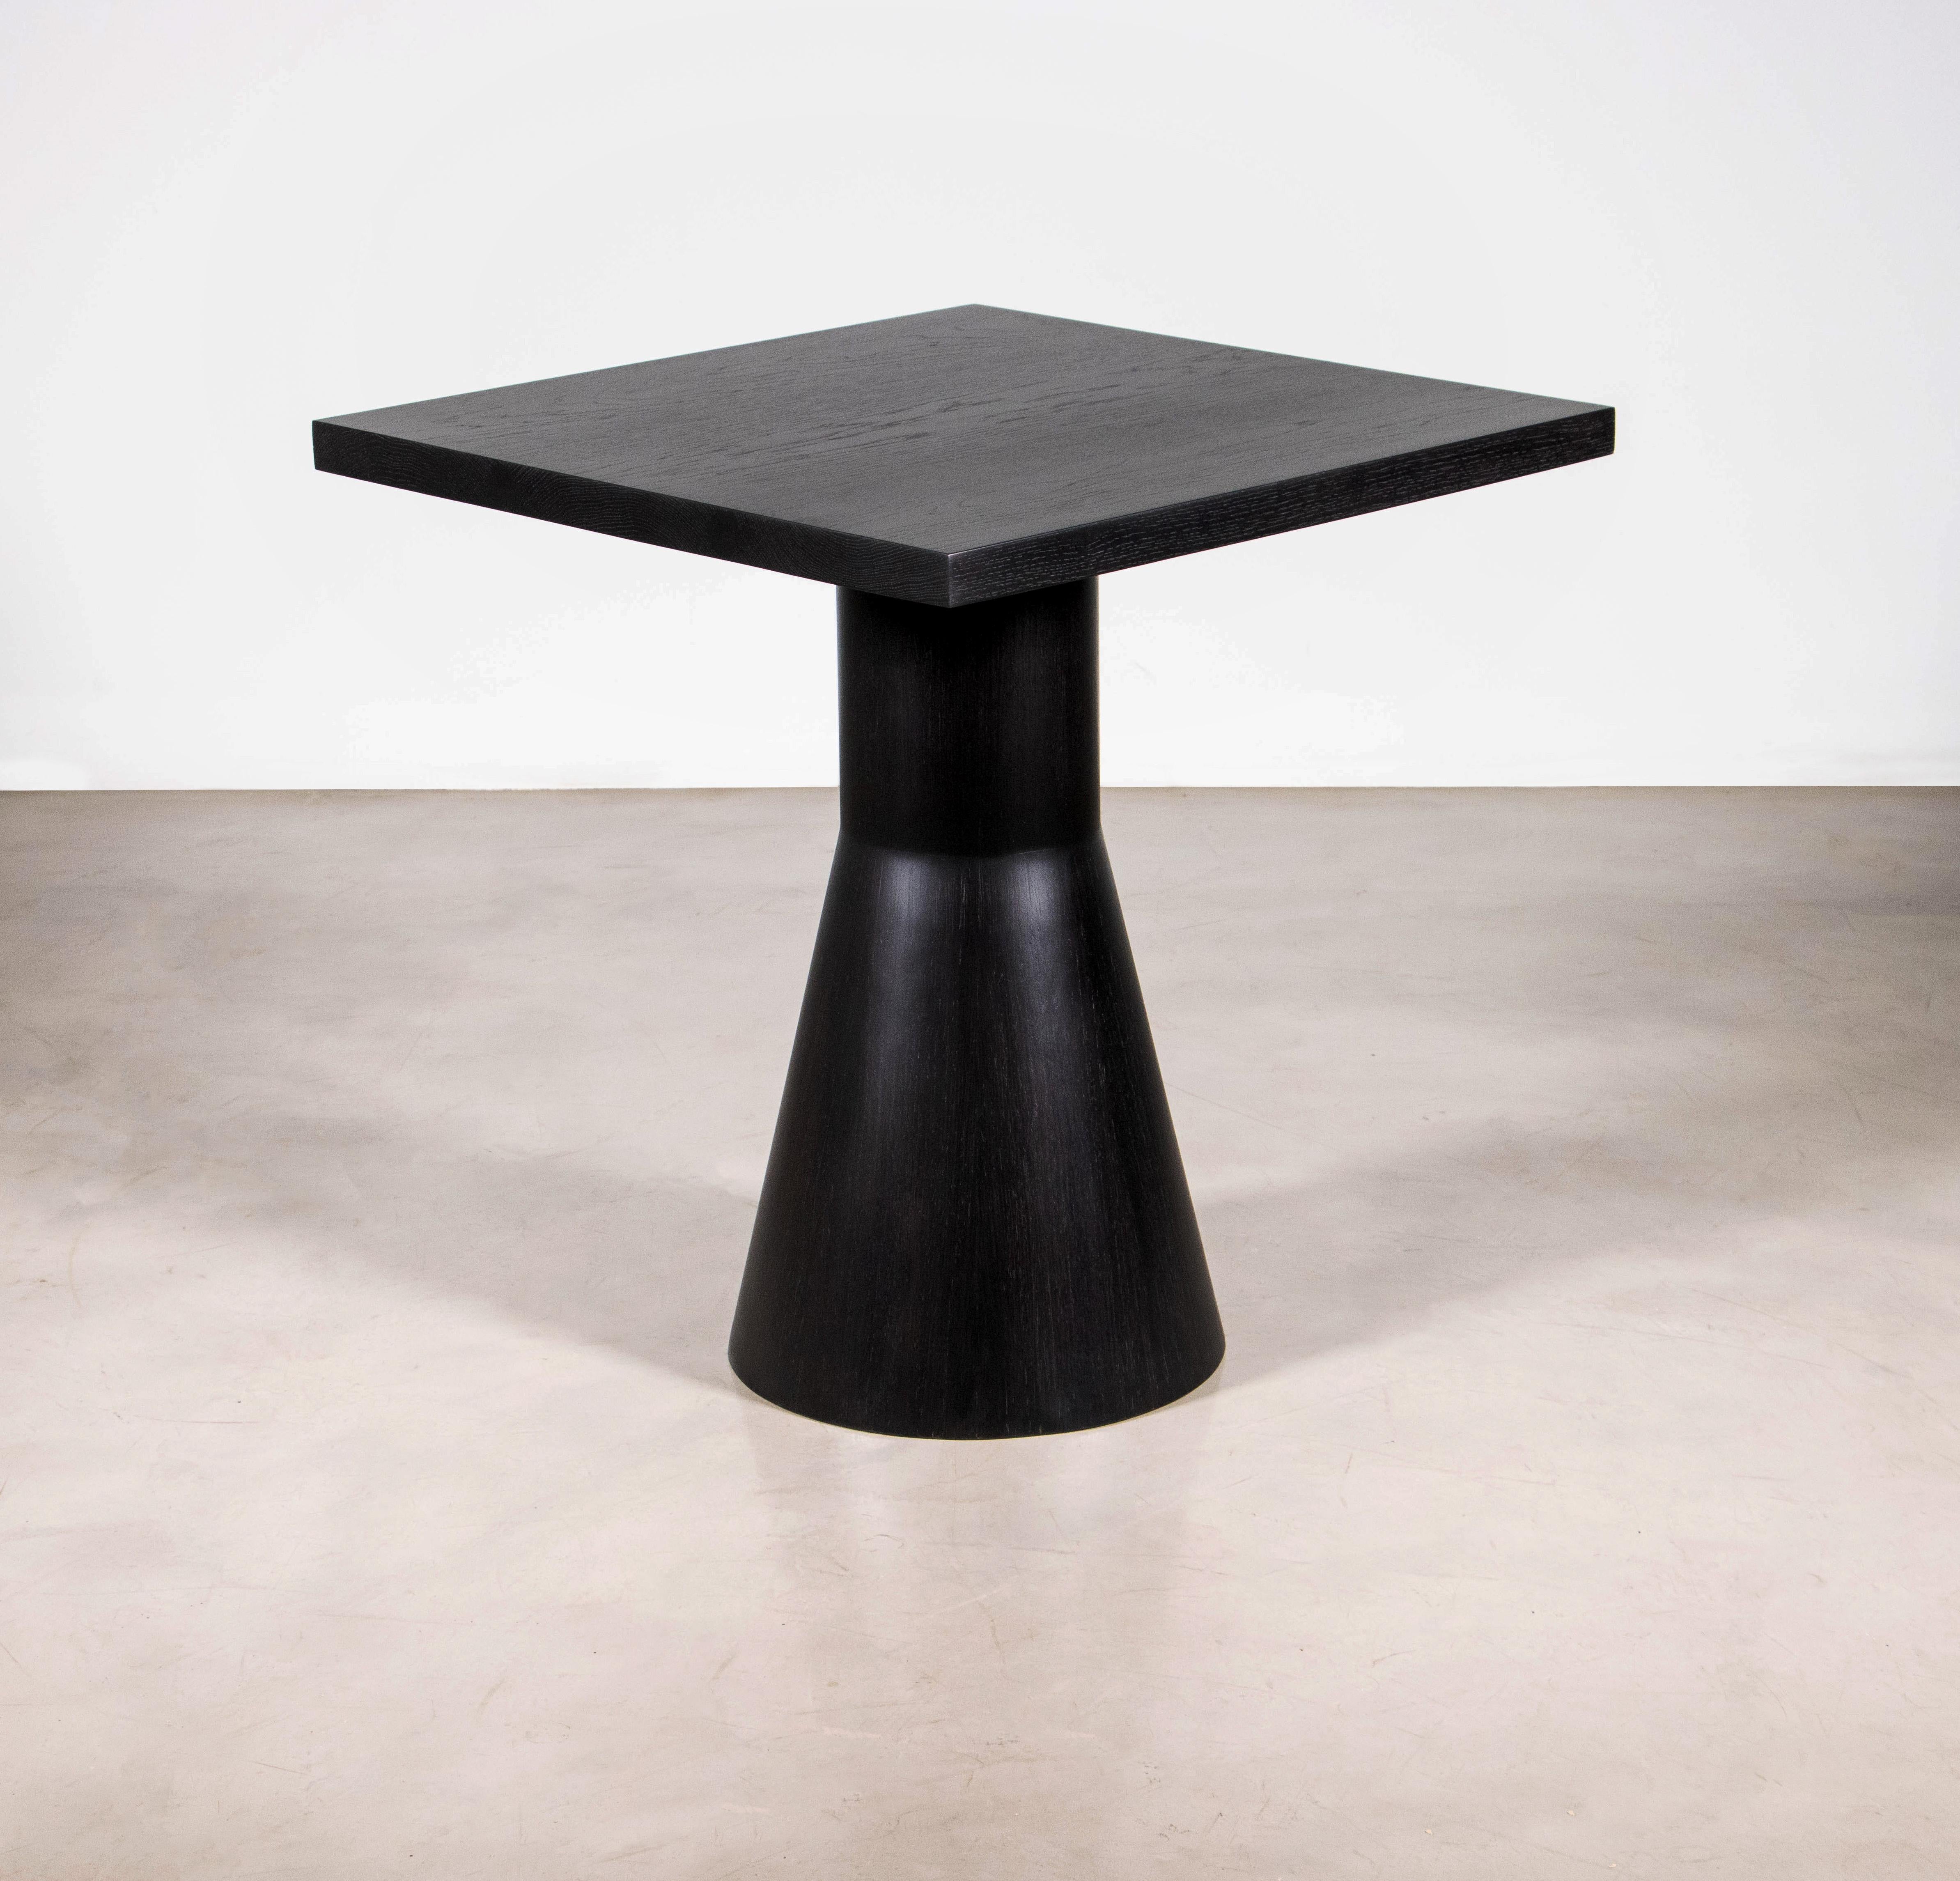 Serena is a Geometric Modern Ebonized Oak Square Dining Table By Costantini Design 

This table is made to order and available as shown or in the size, shape, material and finish of your choice. 

Measurements are 27.5